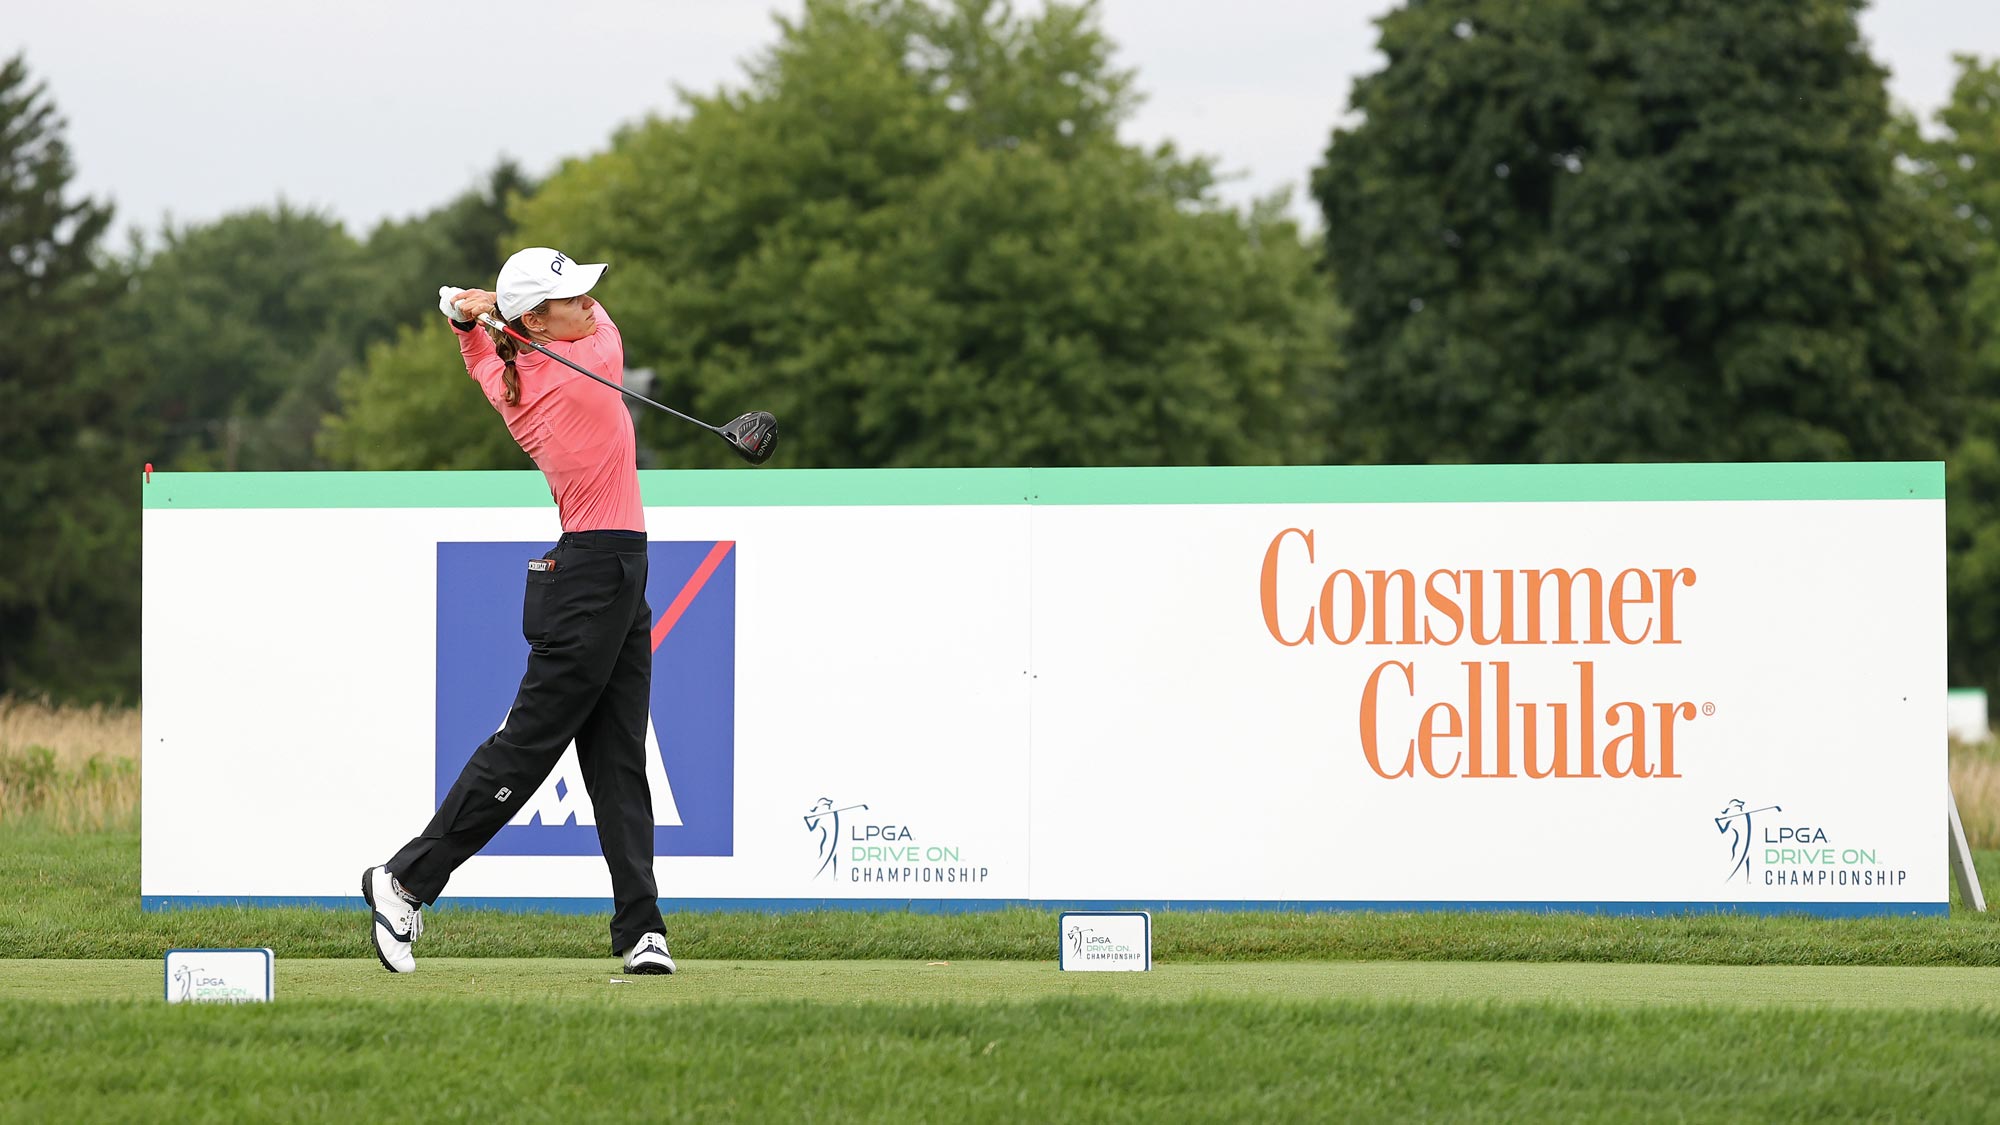 Sarah Schmelzel plays her shot from the 14th tee during the final round of the LPGA Drive On Championship